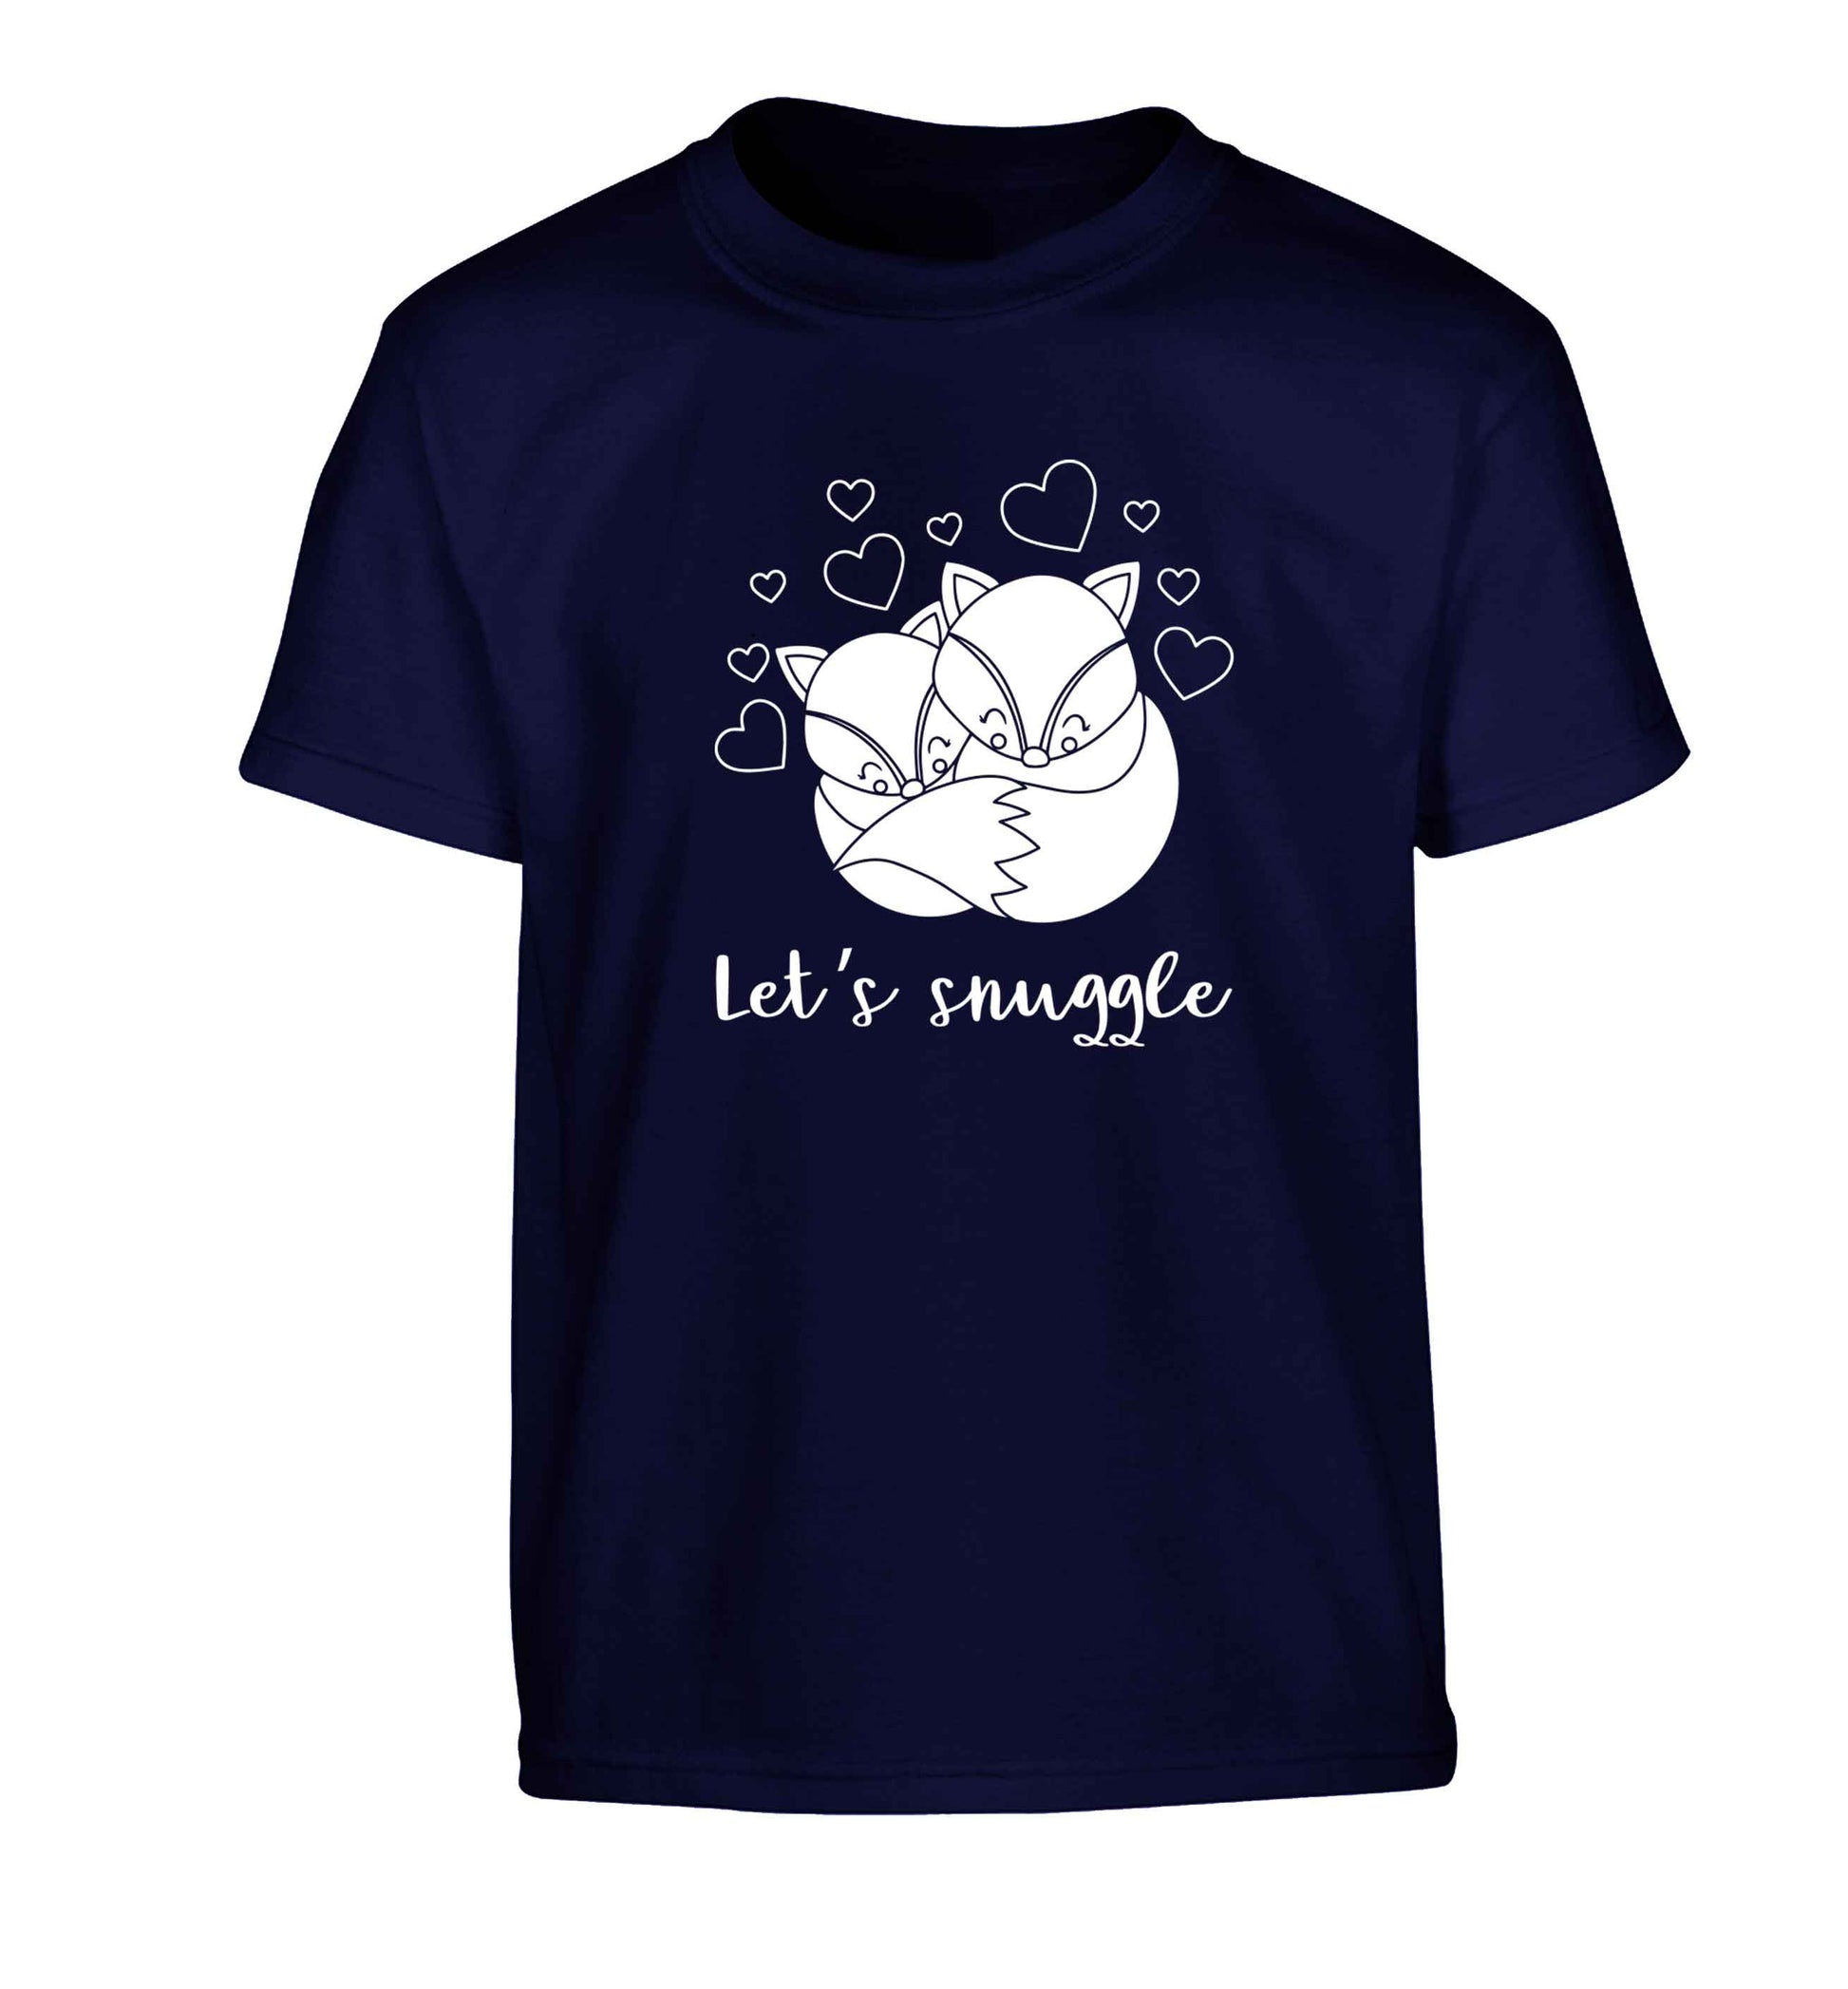 Let's snuggle Children's navy Tshirt 12-13 Years